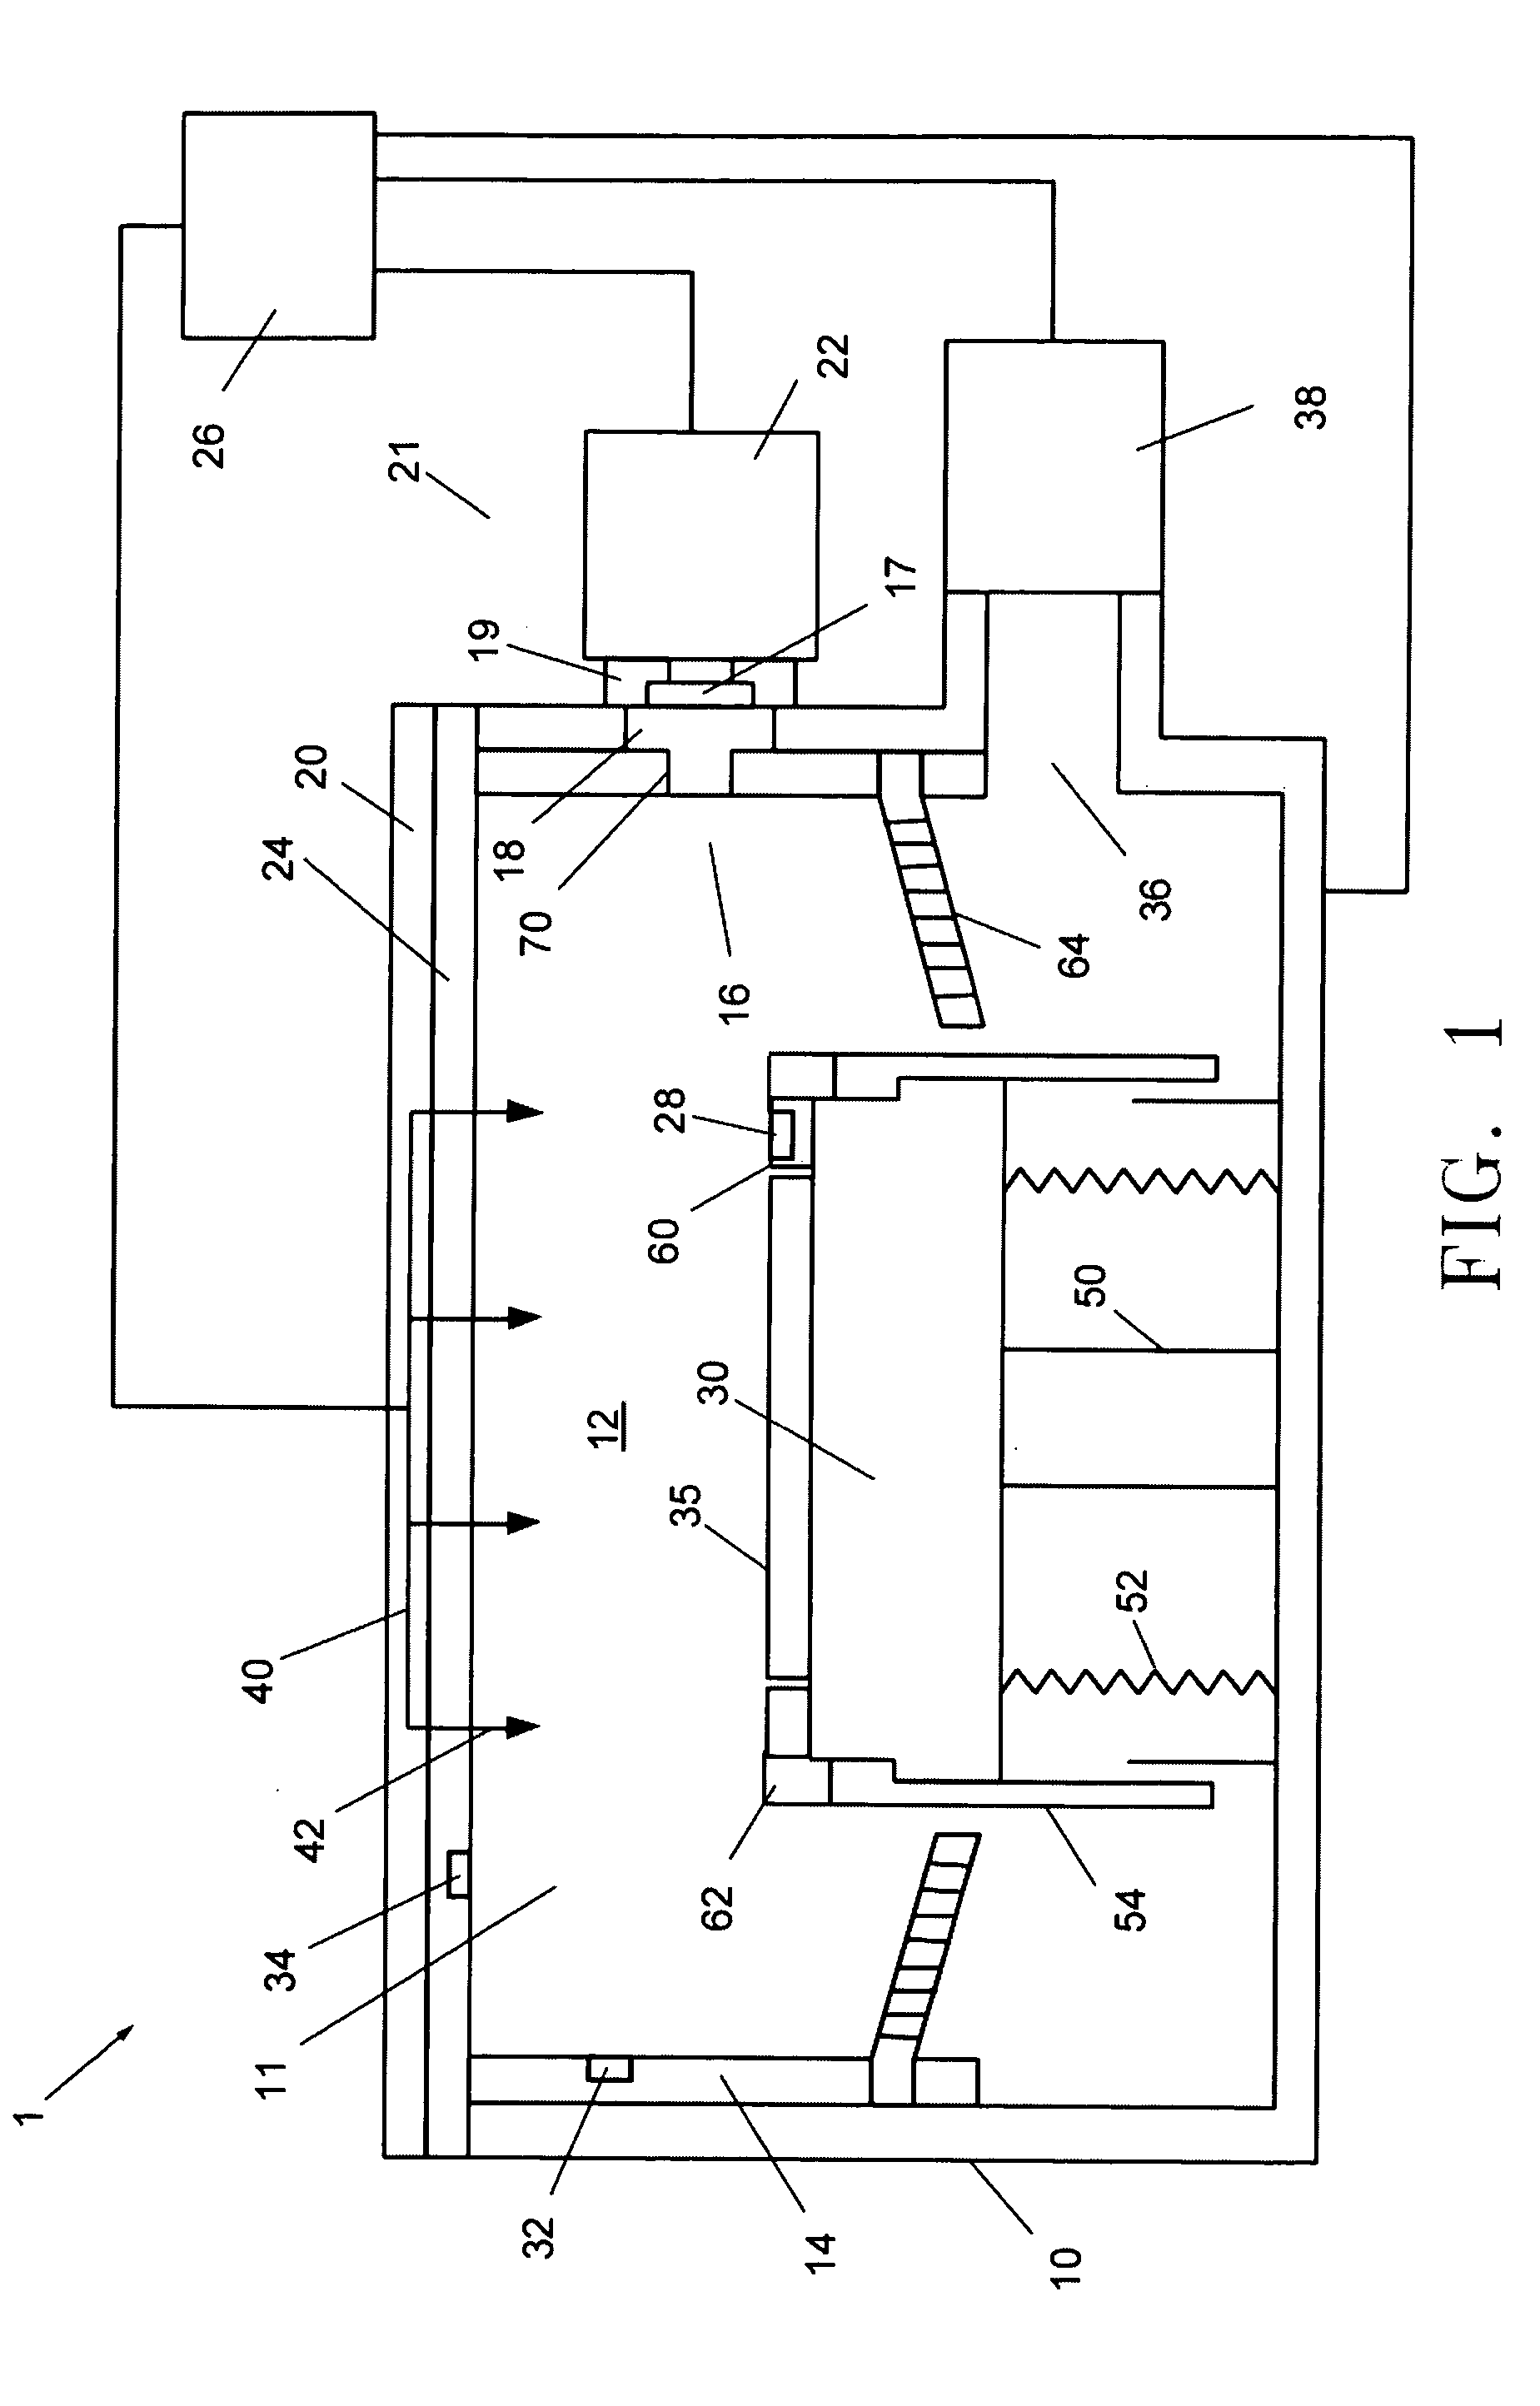 Sensing component used to monitor material buildup and material erosion of consumables by optical emission